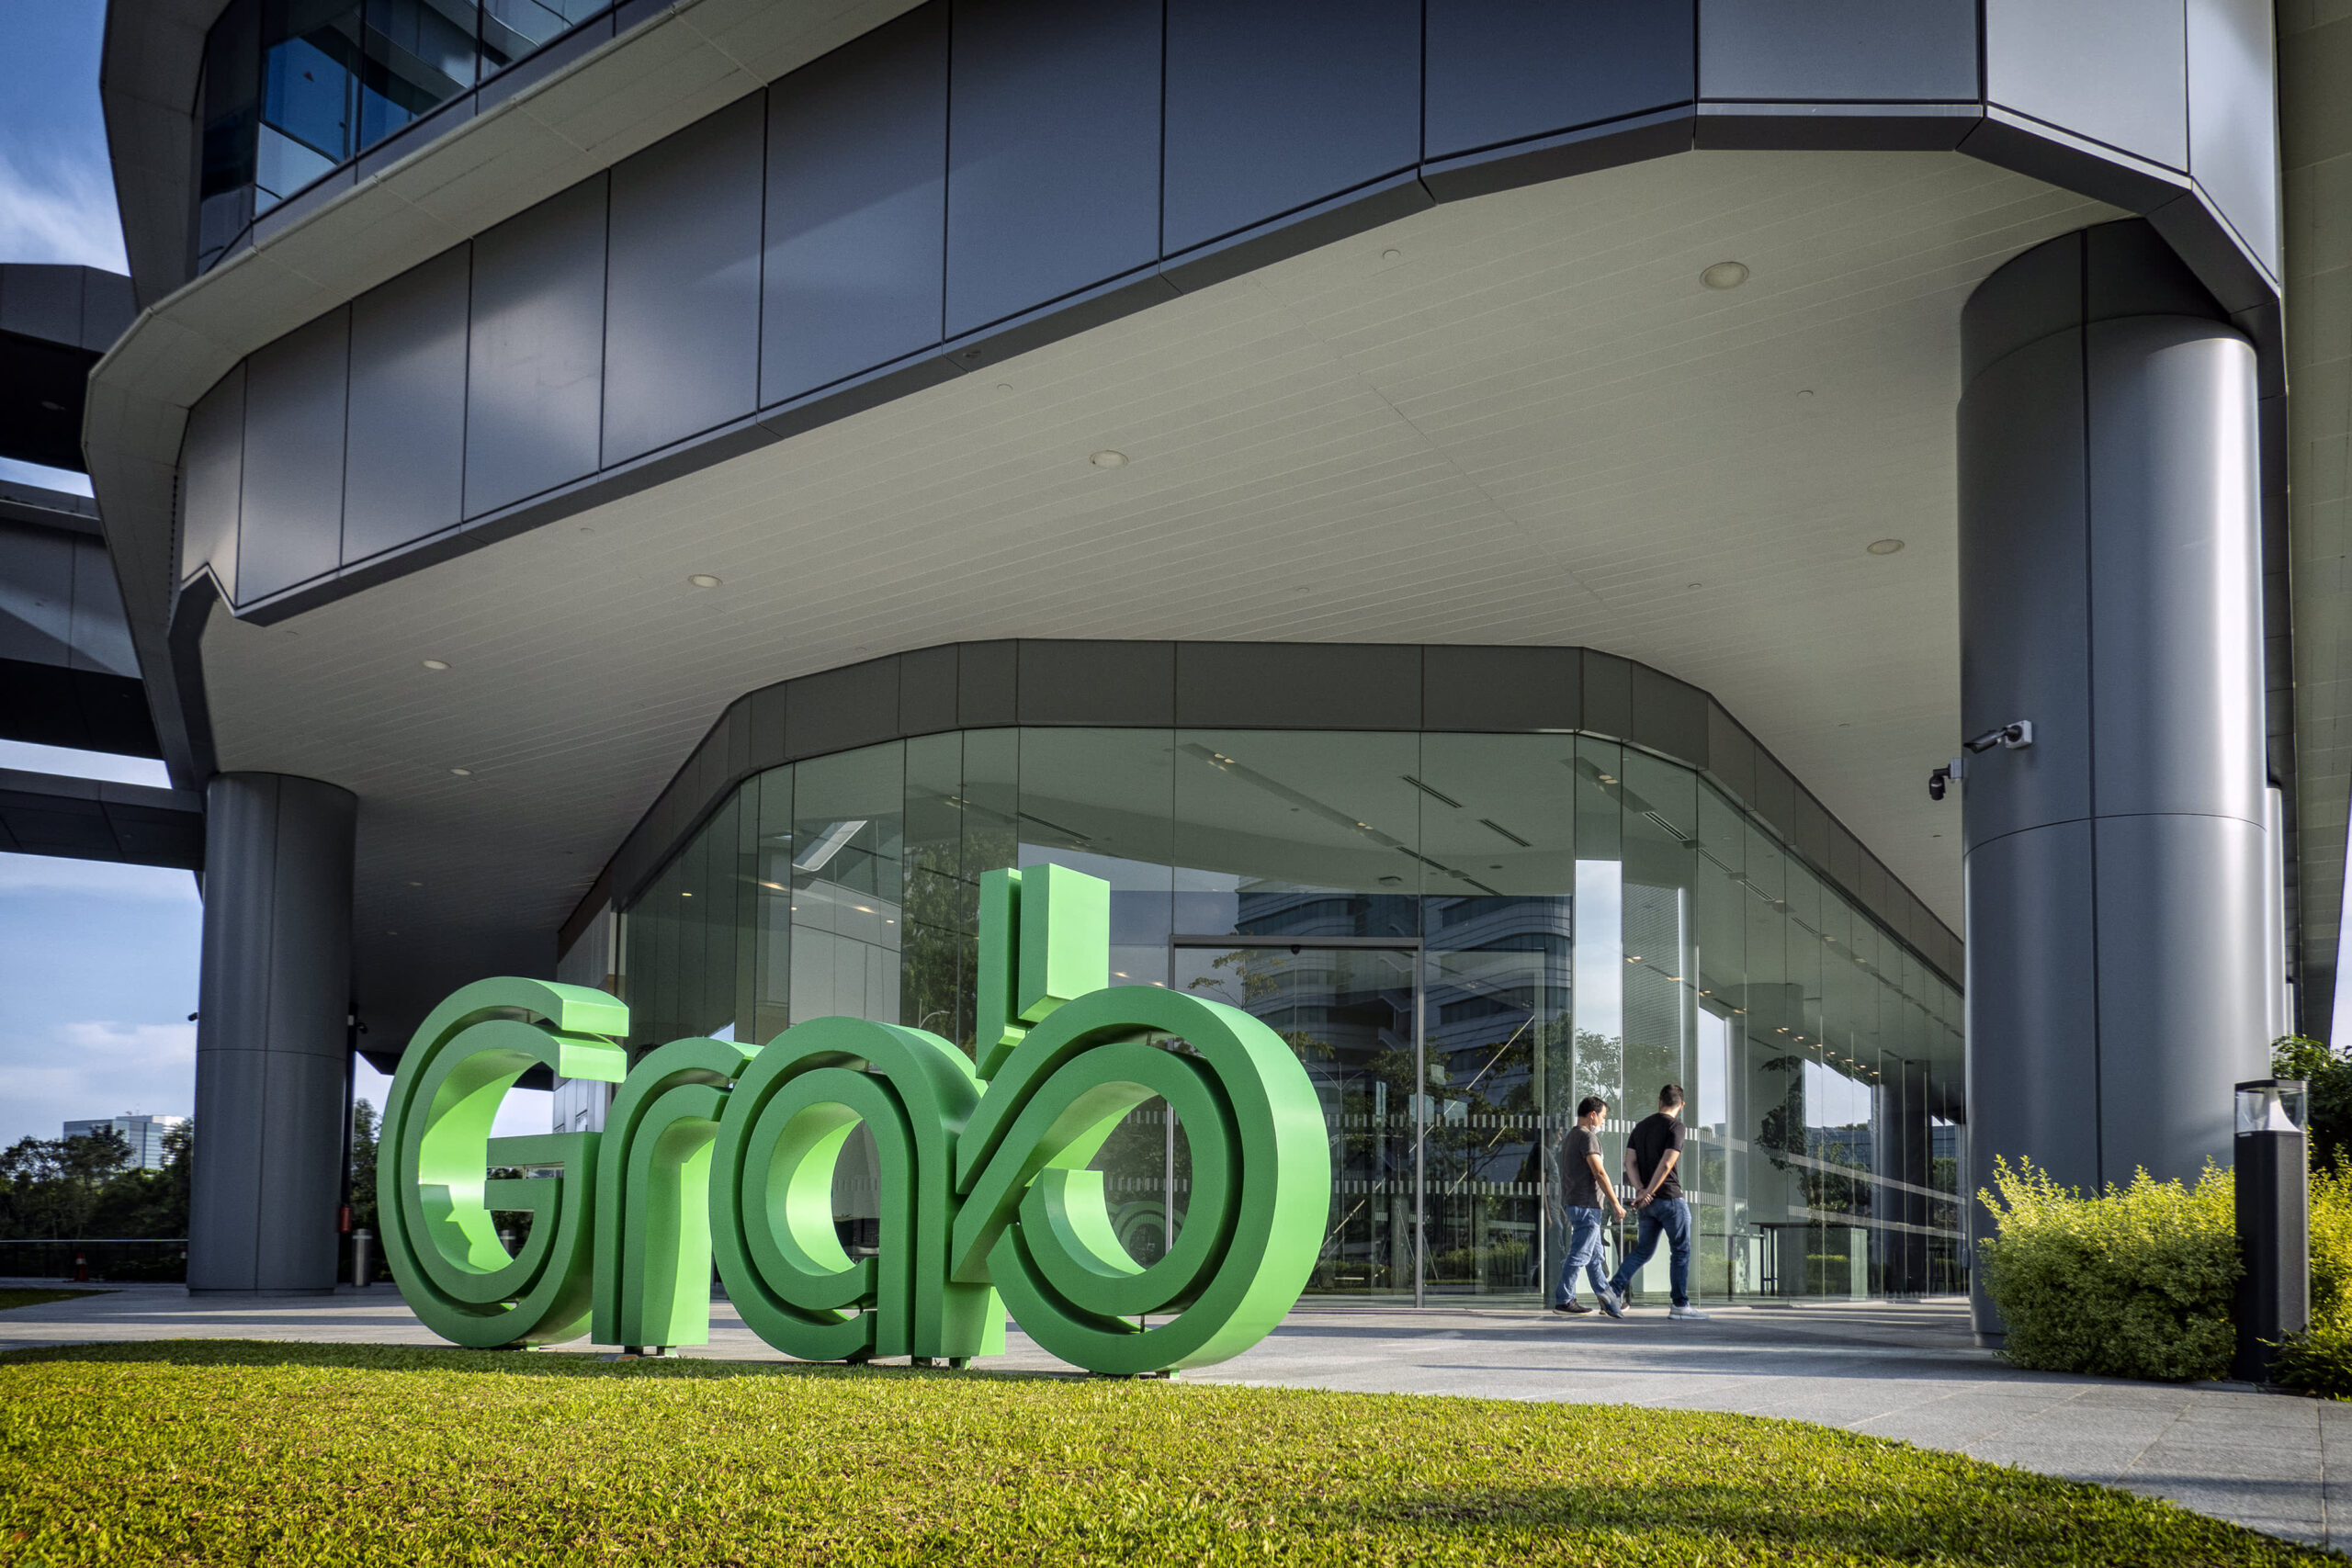 Singapore's regulatory authority for competition scrutinized the possible Grab and Delivery Hero agreement.